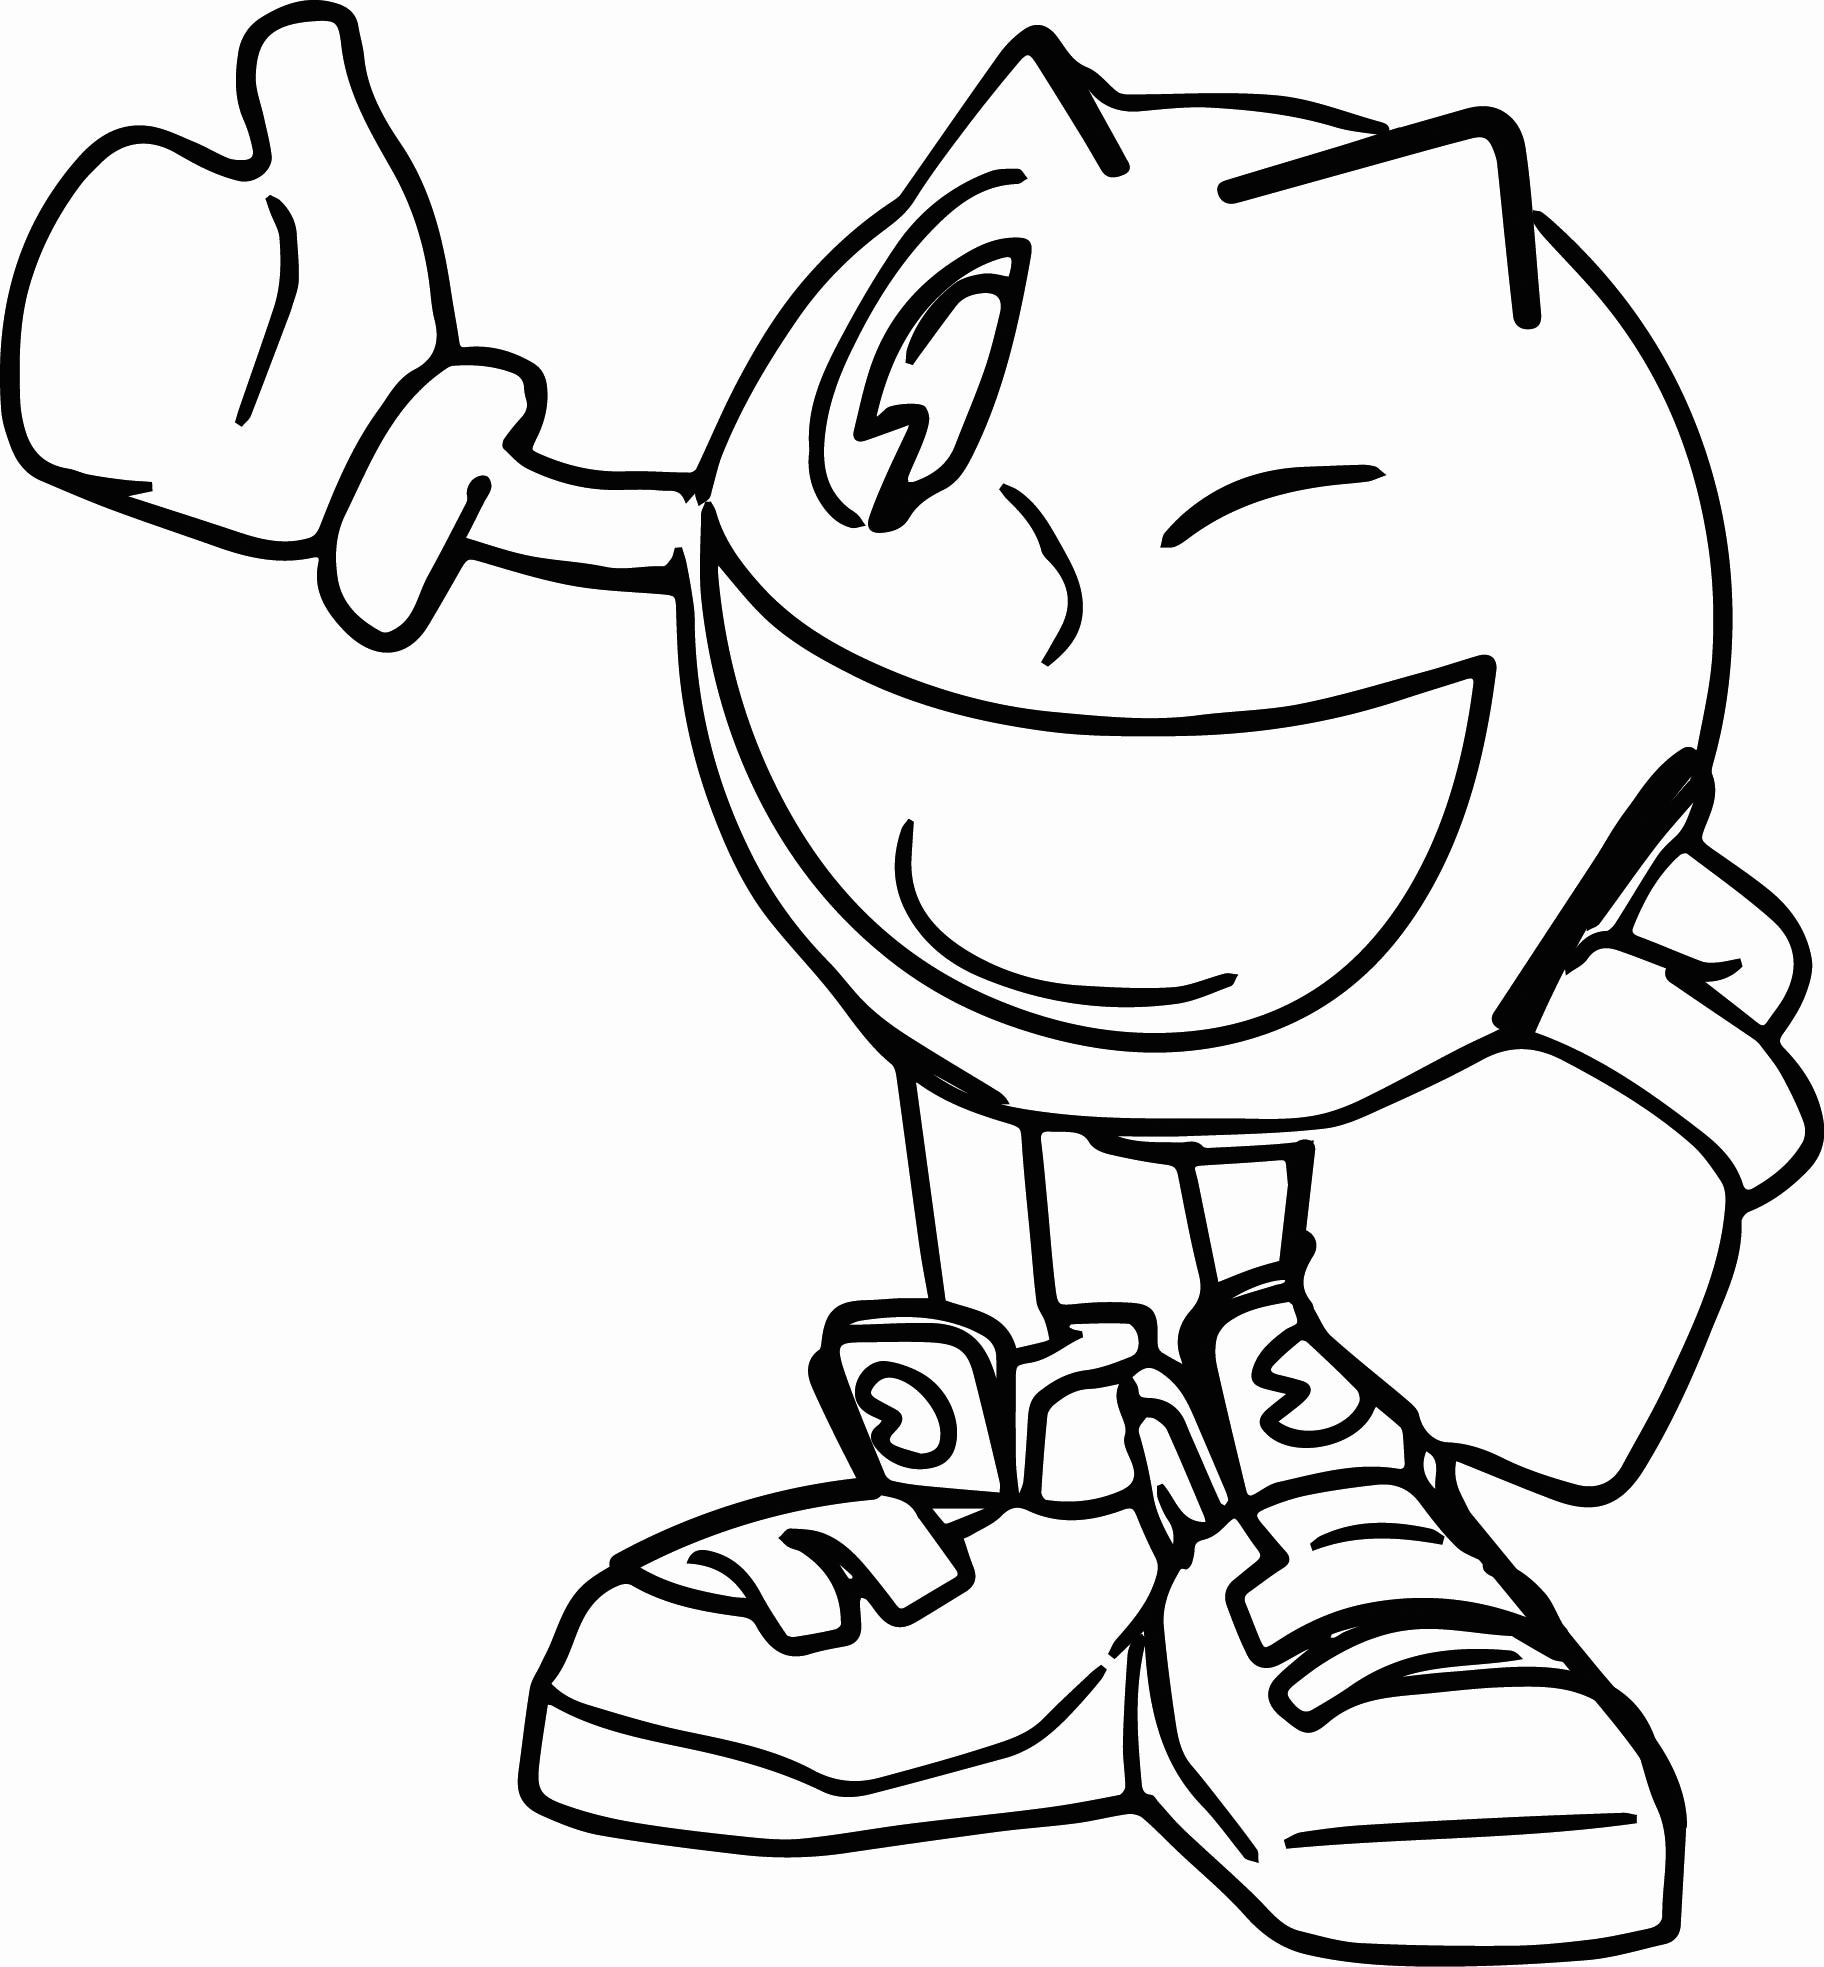 Thumbs Up Pac Man Coloring Page